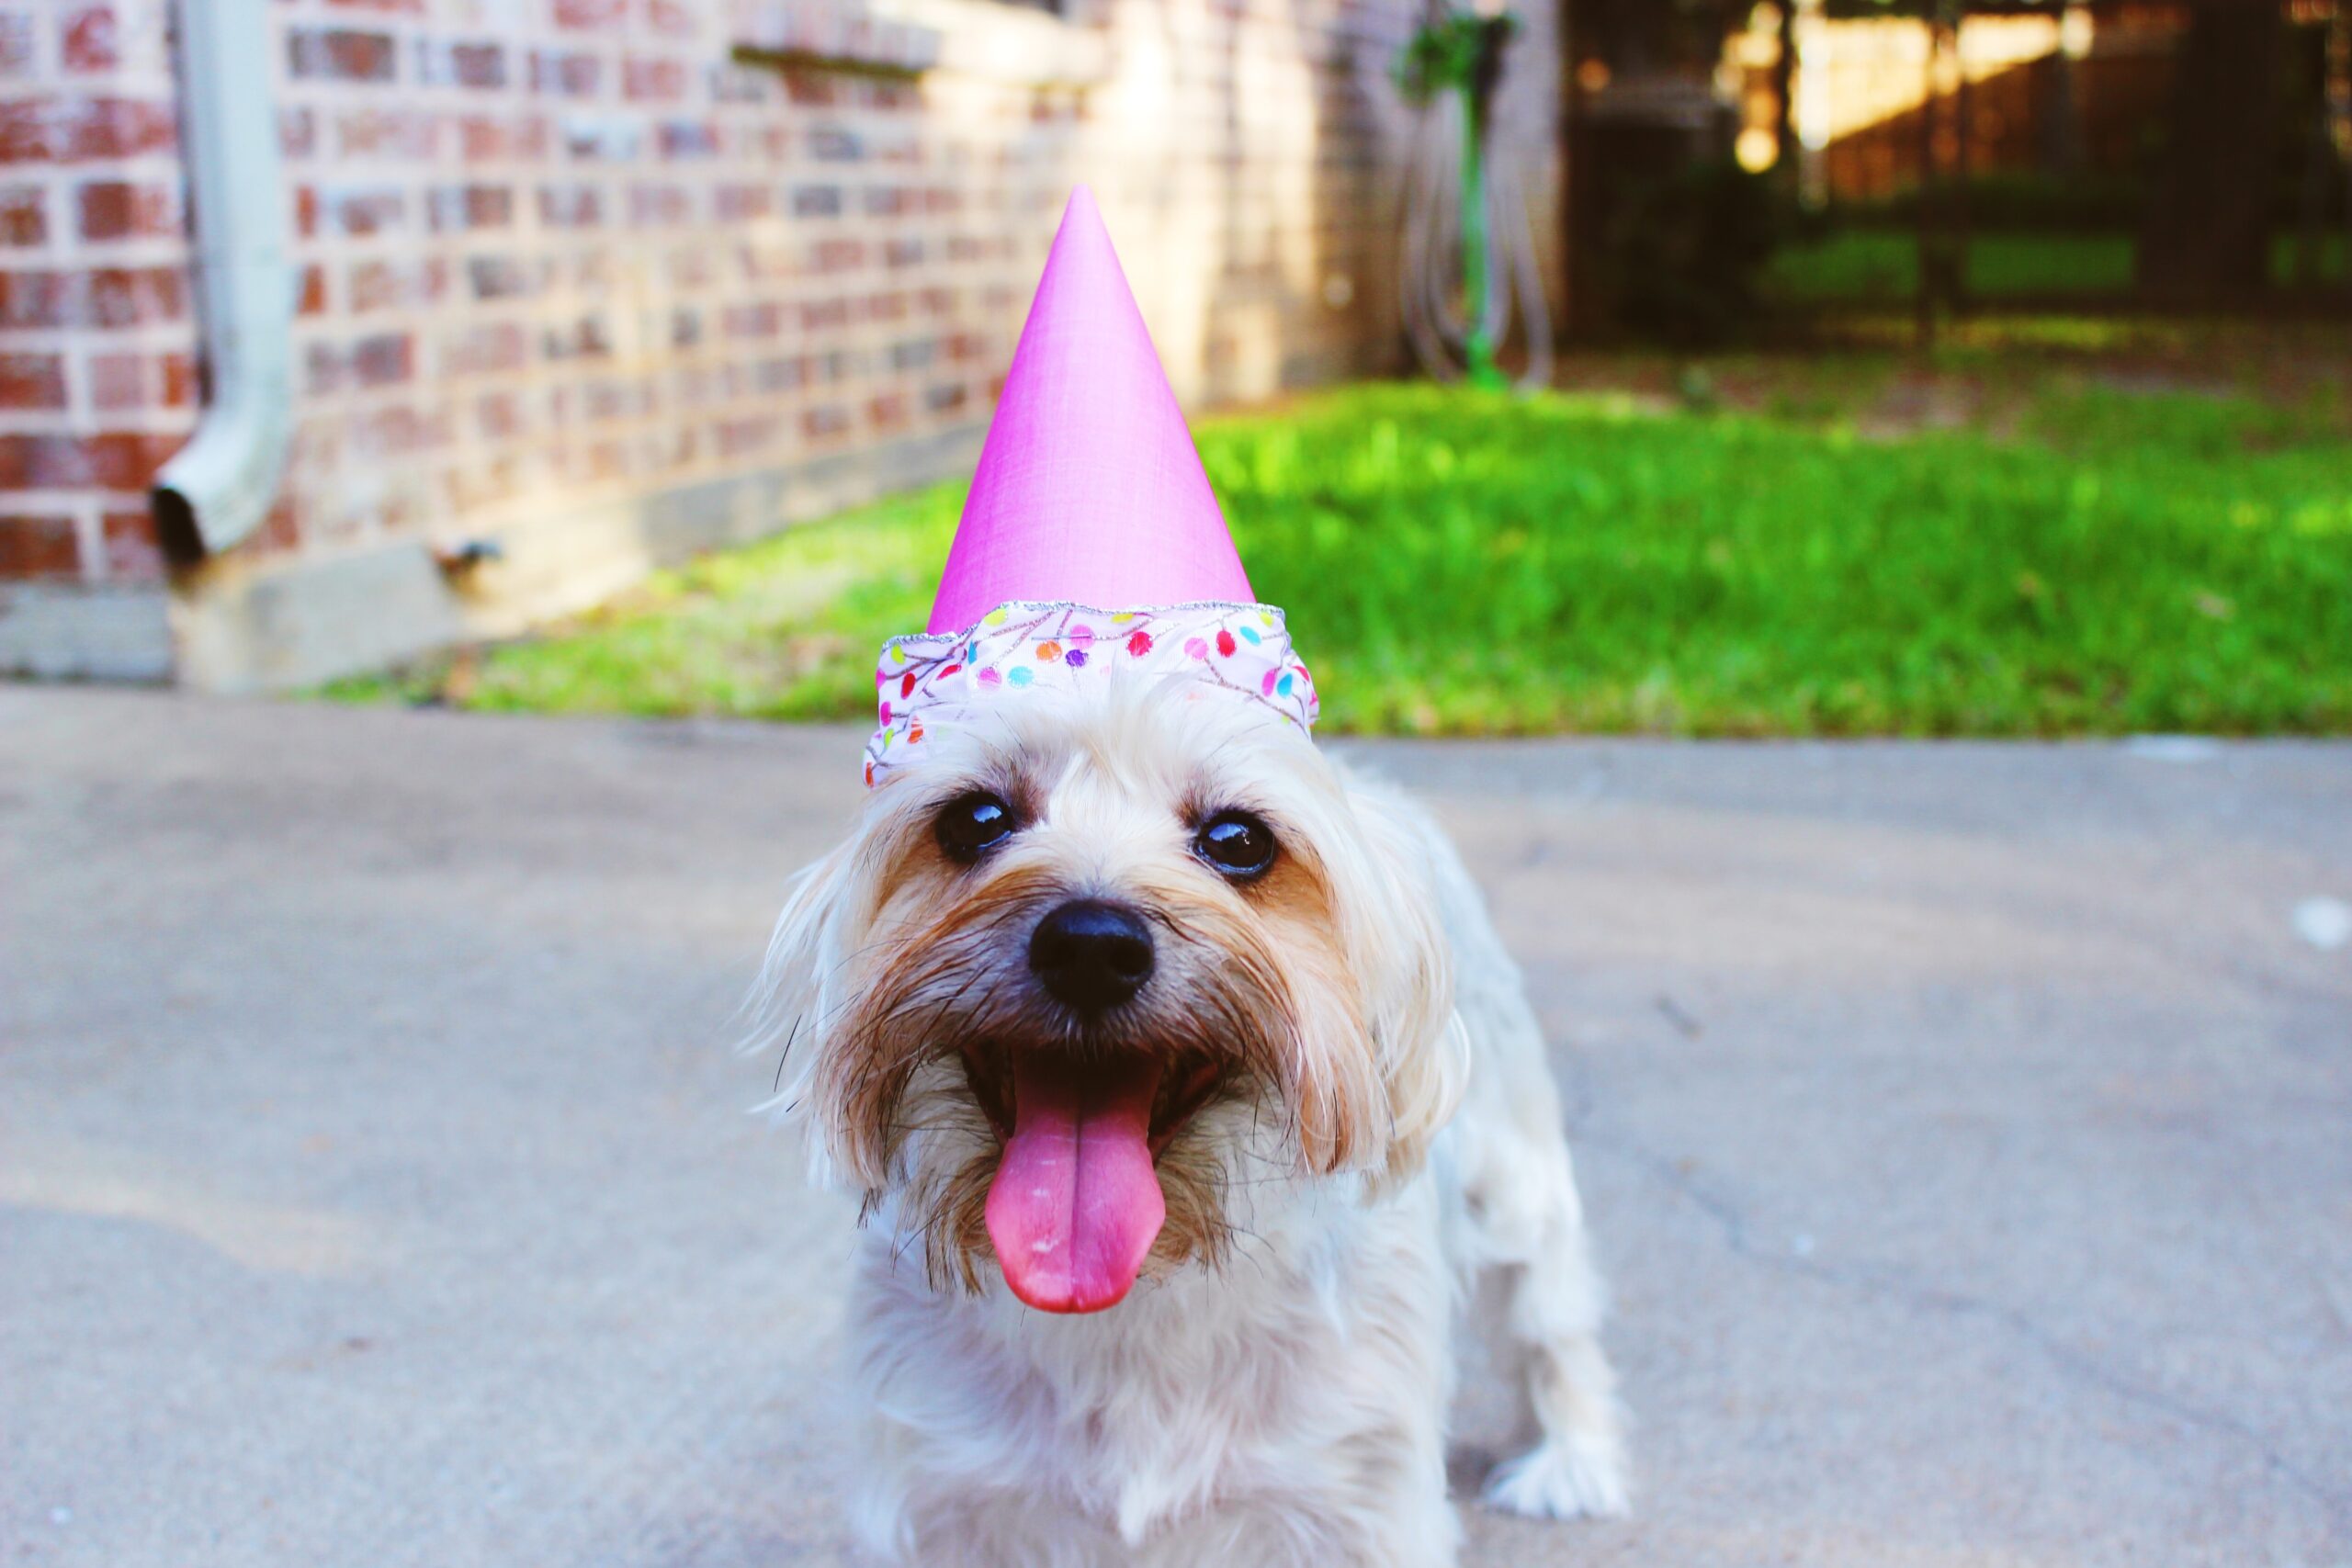 Image of a happy dog in a pink party hat, representing customer satisfaction. Image by Delaney Dawson on Unsplash.